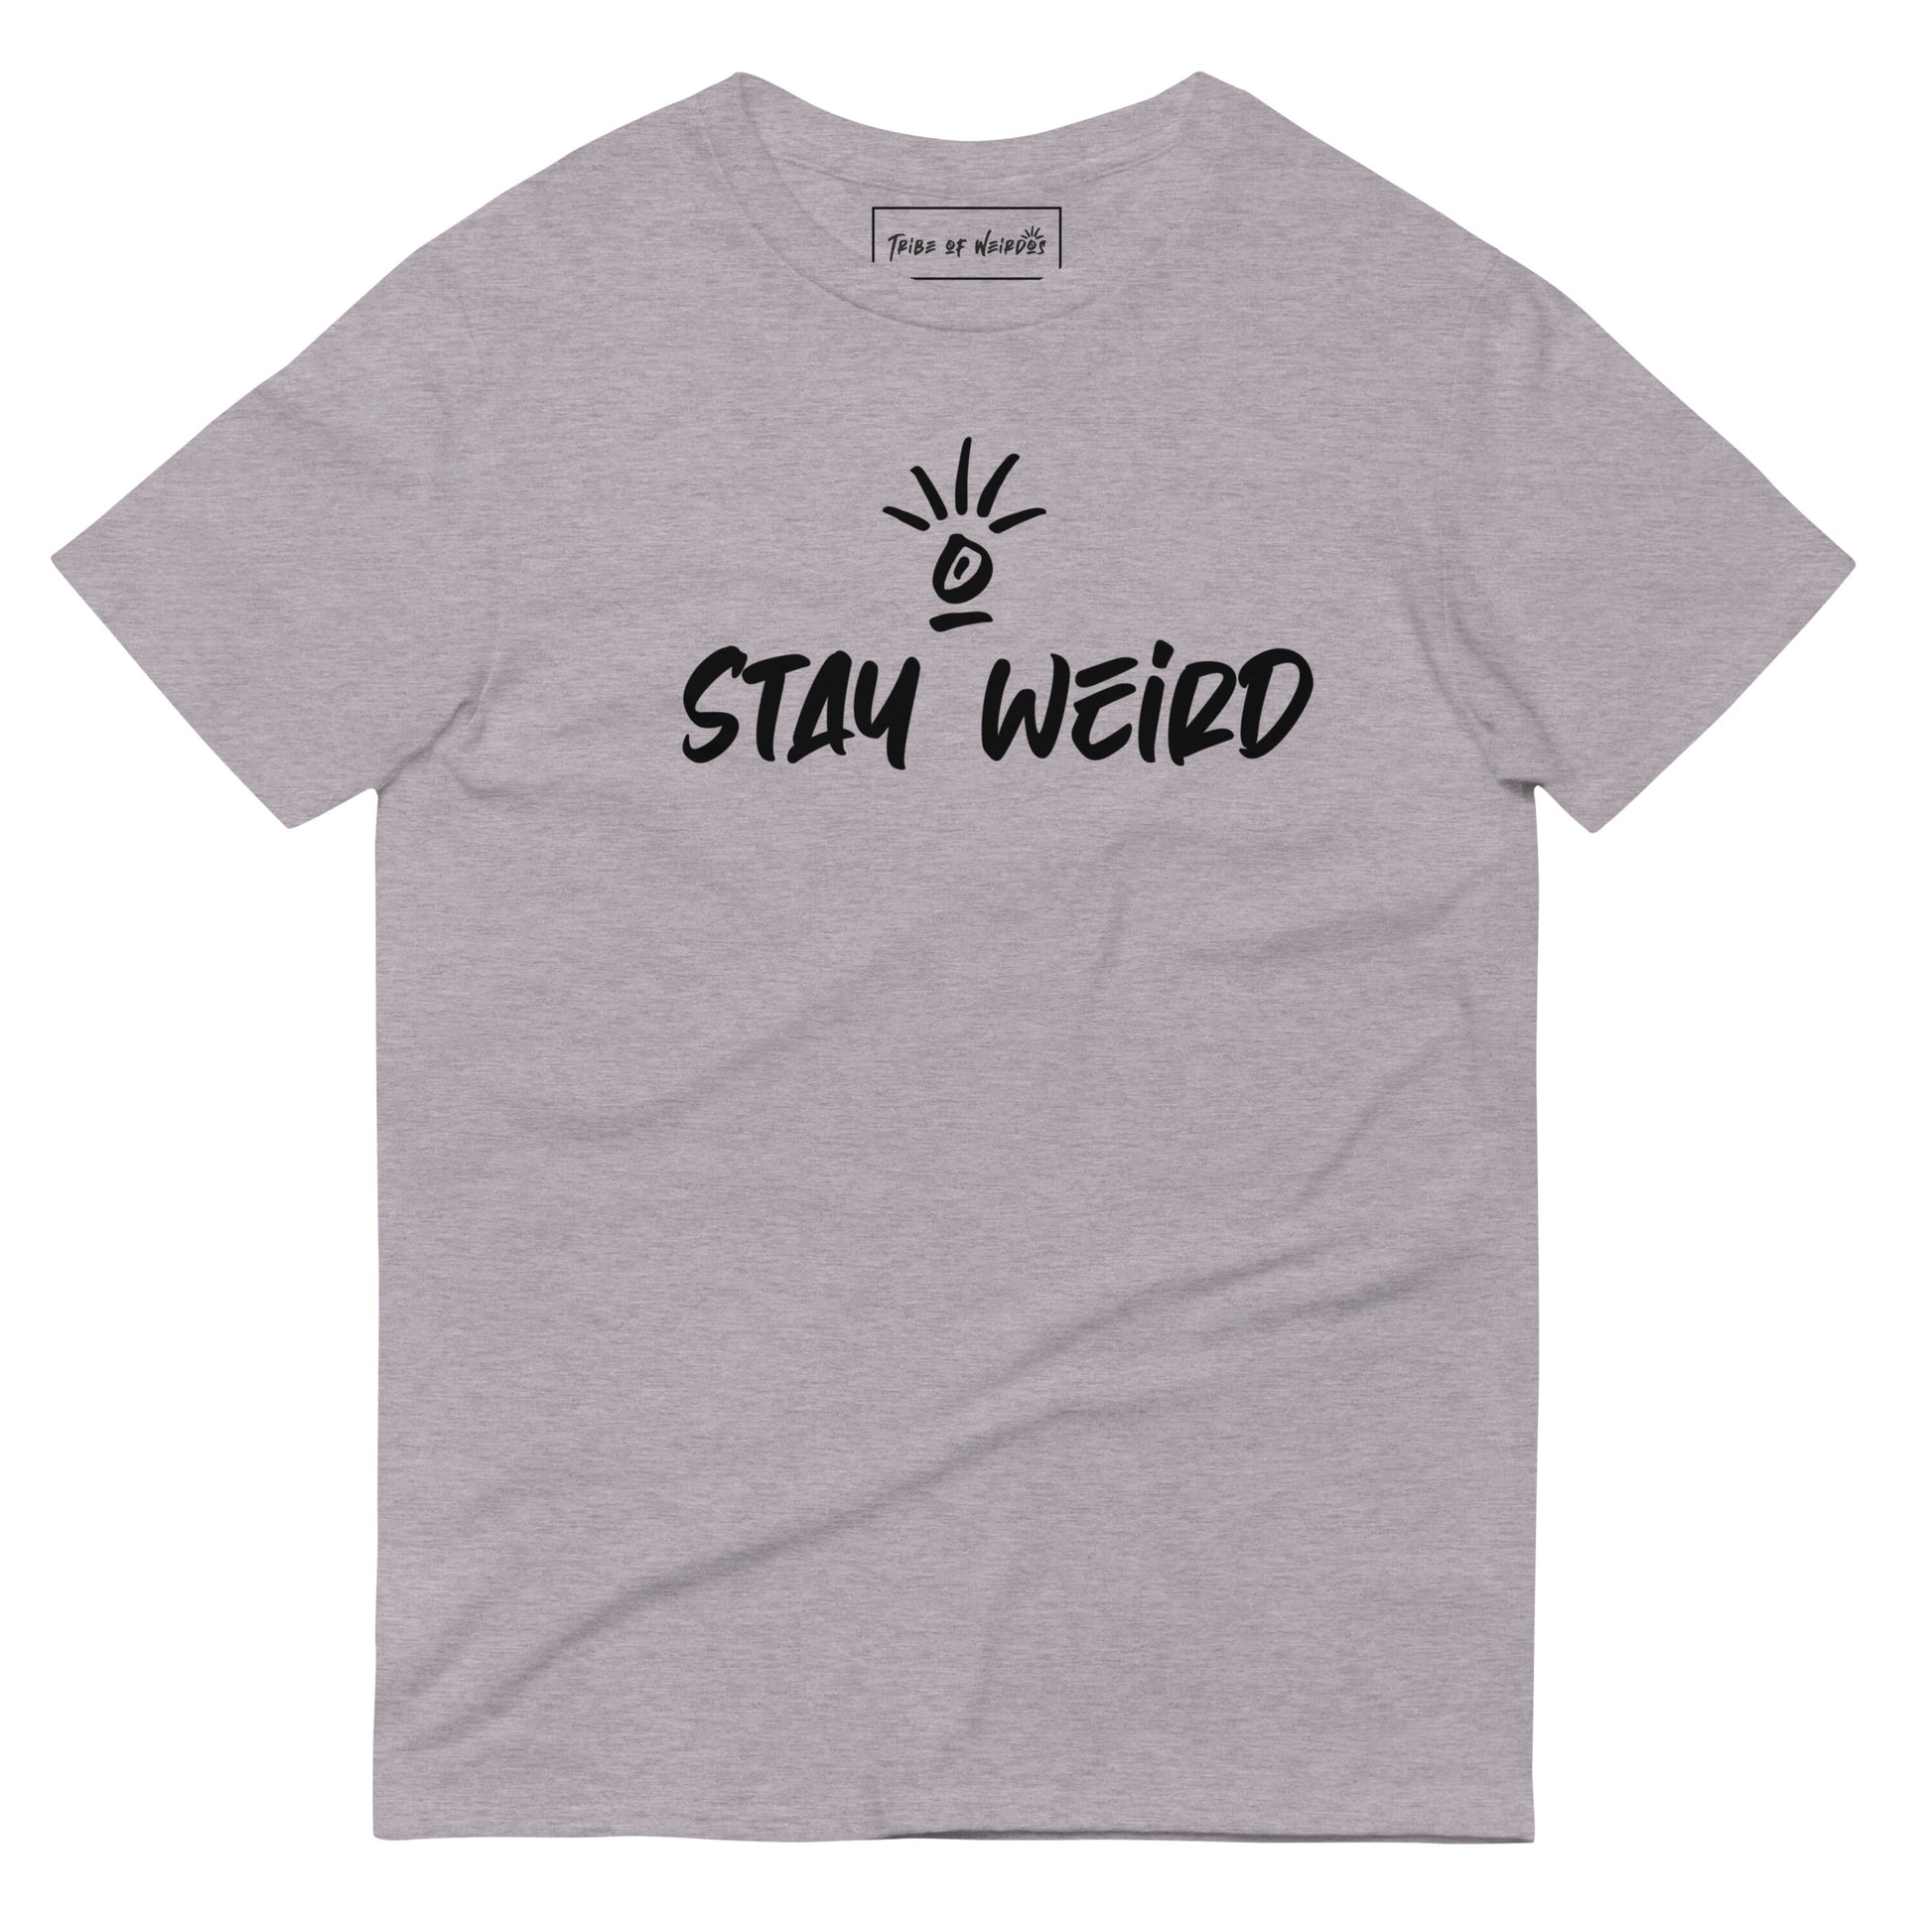 Casual 'Stay Weird' unisex t-shirt, worn to express individuality and the joy of embracing life's quirks.